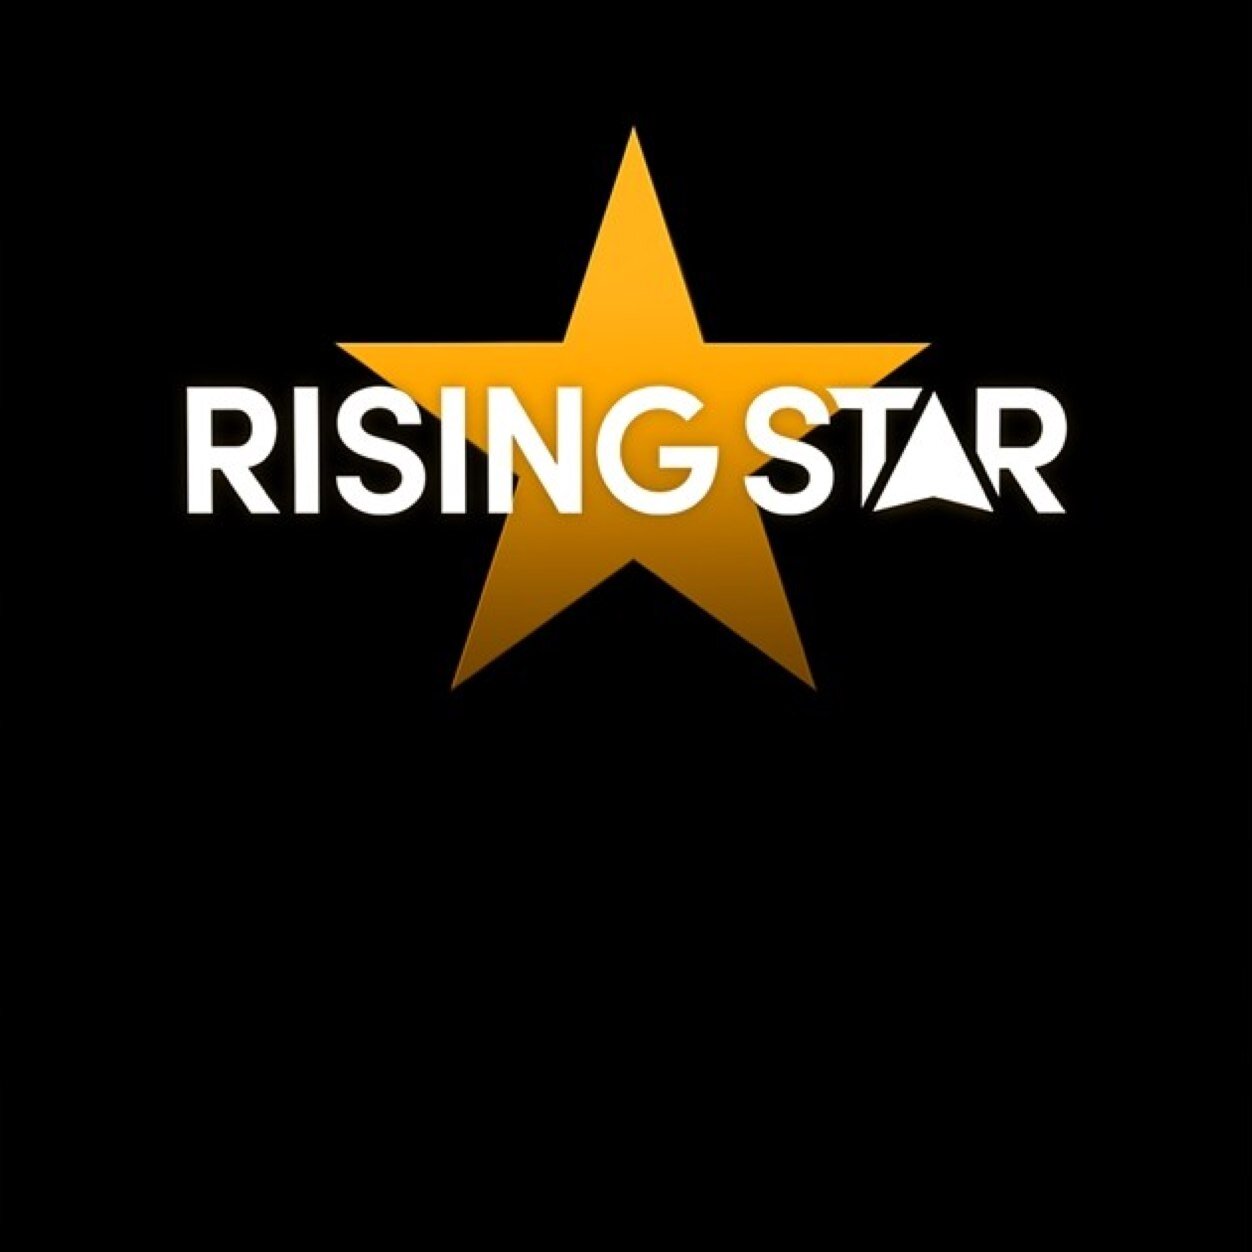 The one and only official twitter account for Rising Star makeup department. Get to know what is happening behind the scenes before the show!